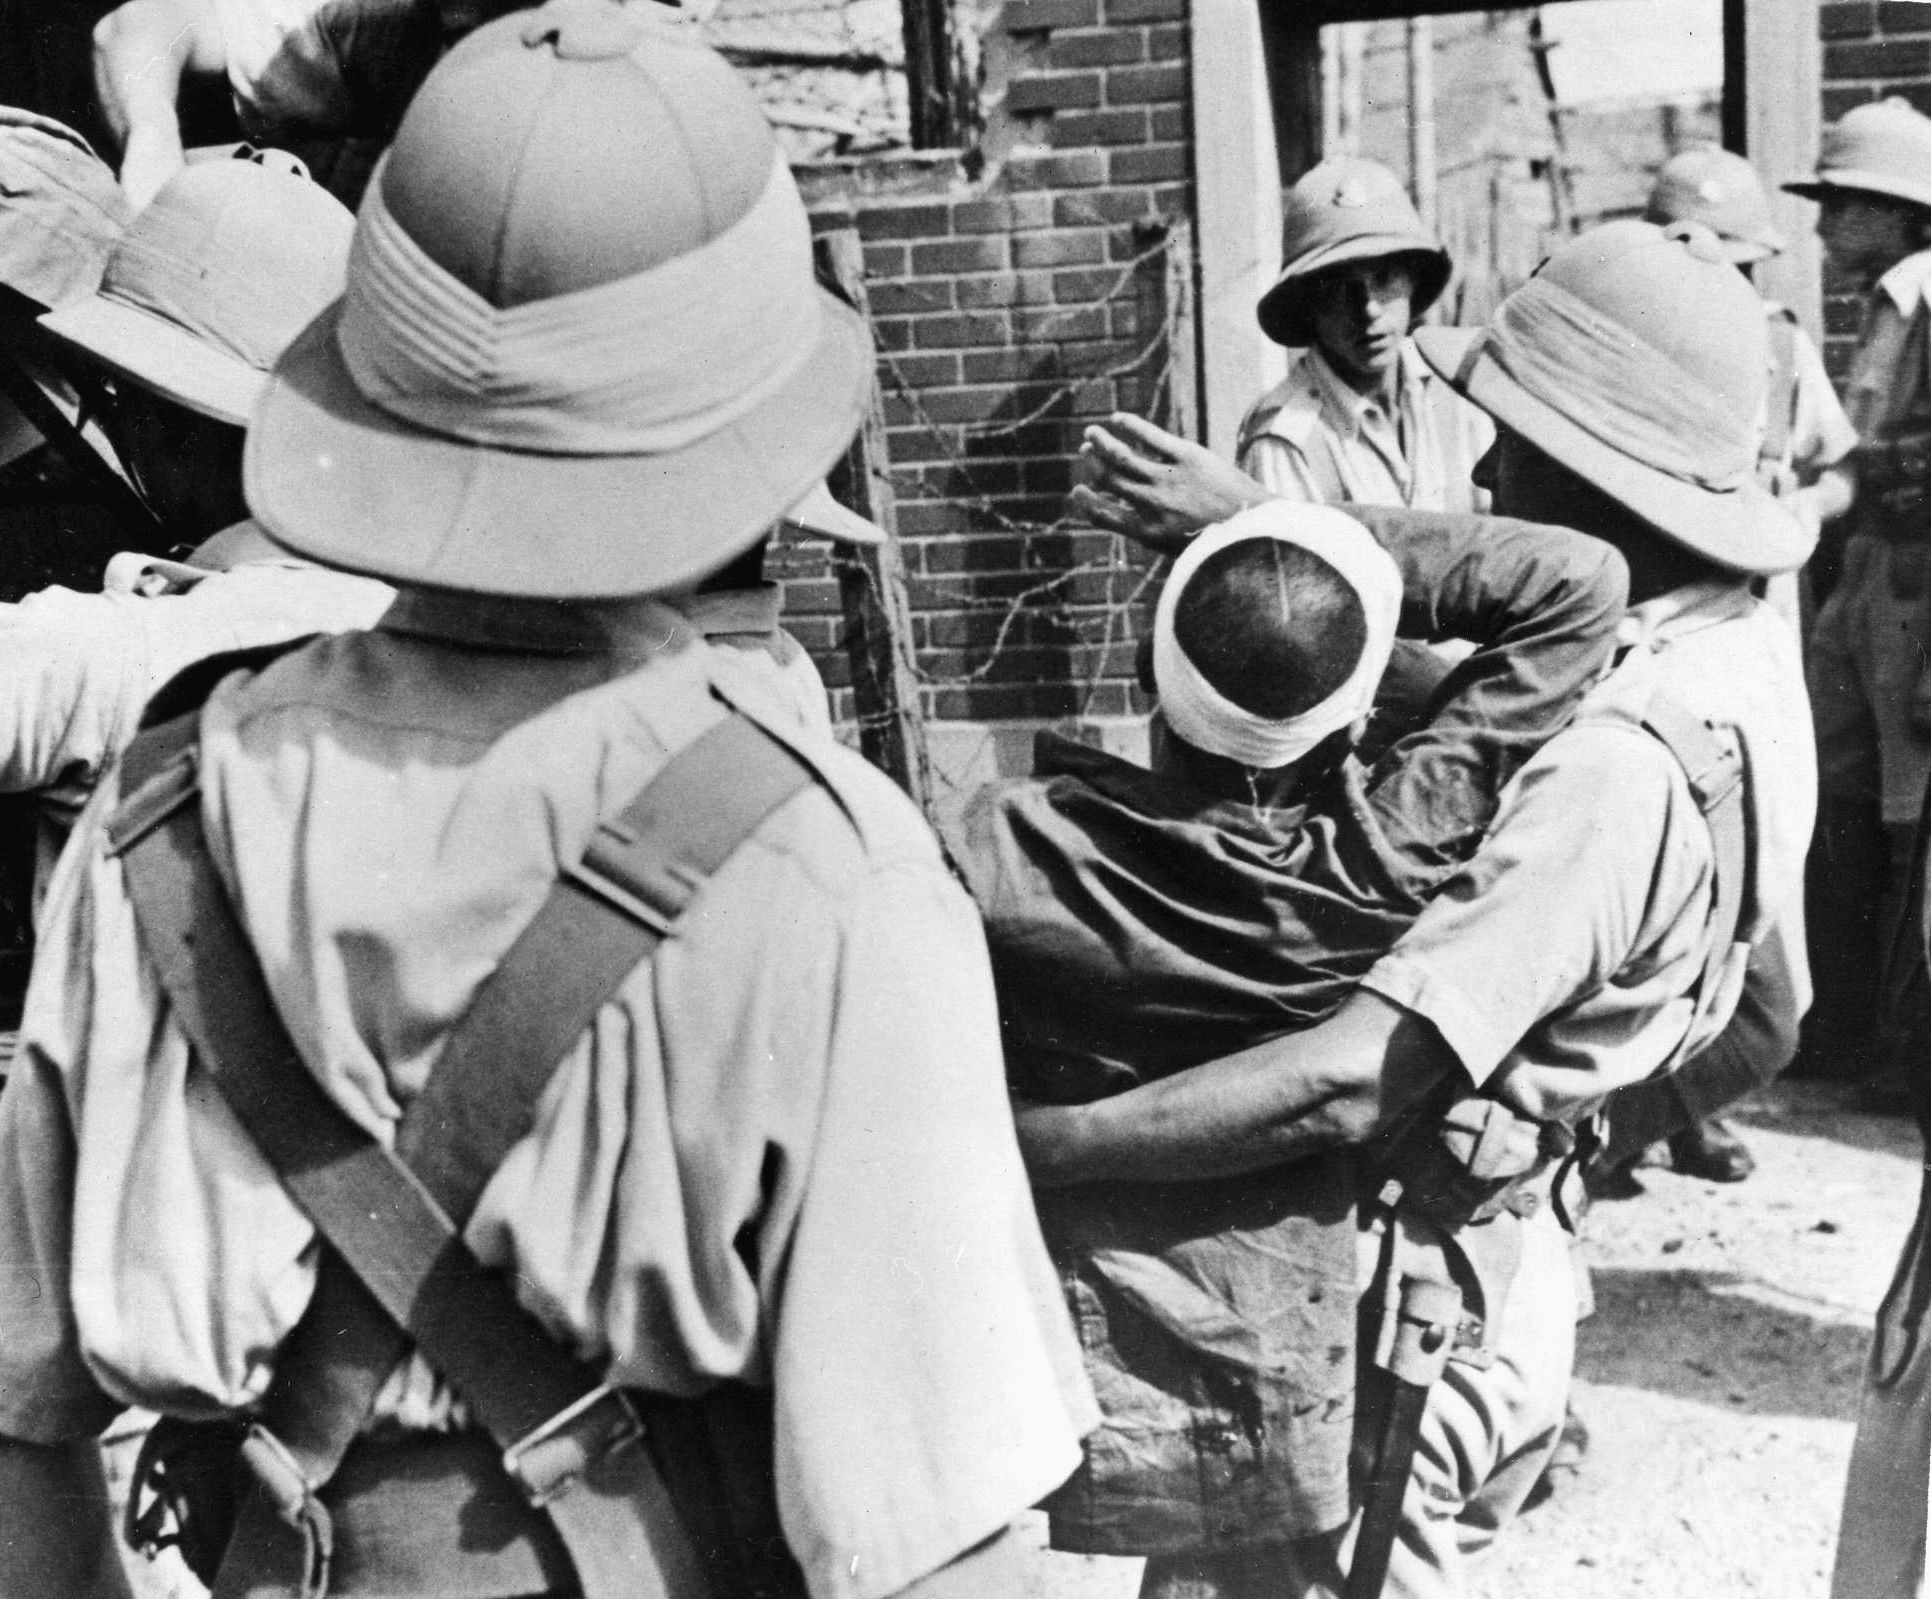 A wounded member of the “Lost Battalion” is carried to an ambulance after the fighting at Sihang Warehouse. 